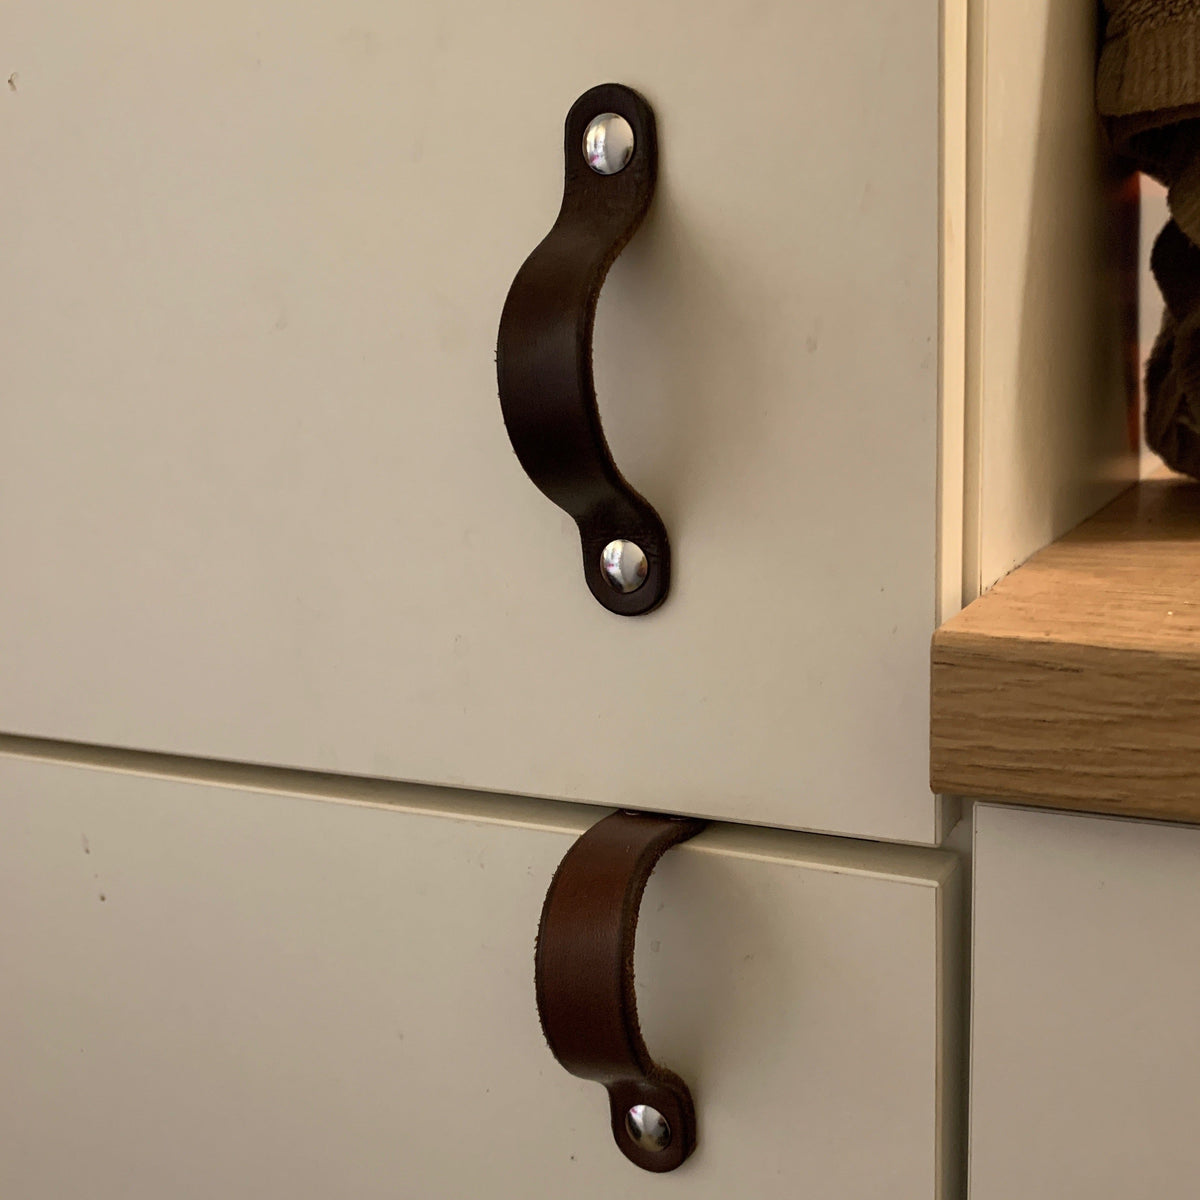 Customer Photo of a Dark Brown Leather Flanders Handle with Nickel Hardware on a White Bathroom Cabinet Door from IKEA Above a Lovejoy Dark Brown Handle on the Cabinet Below